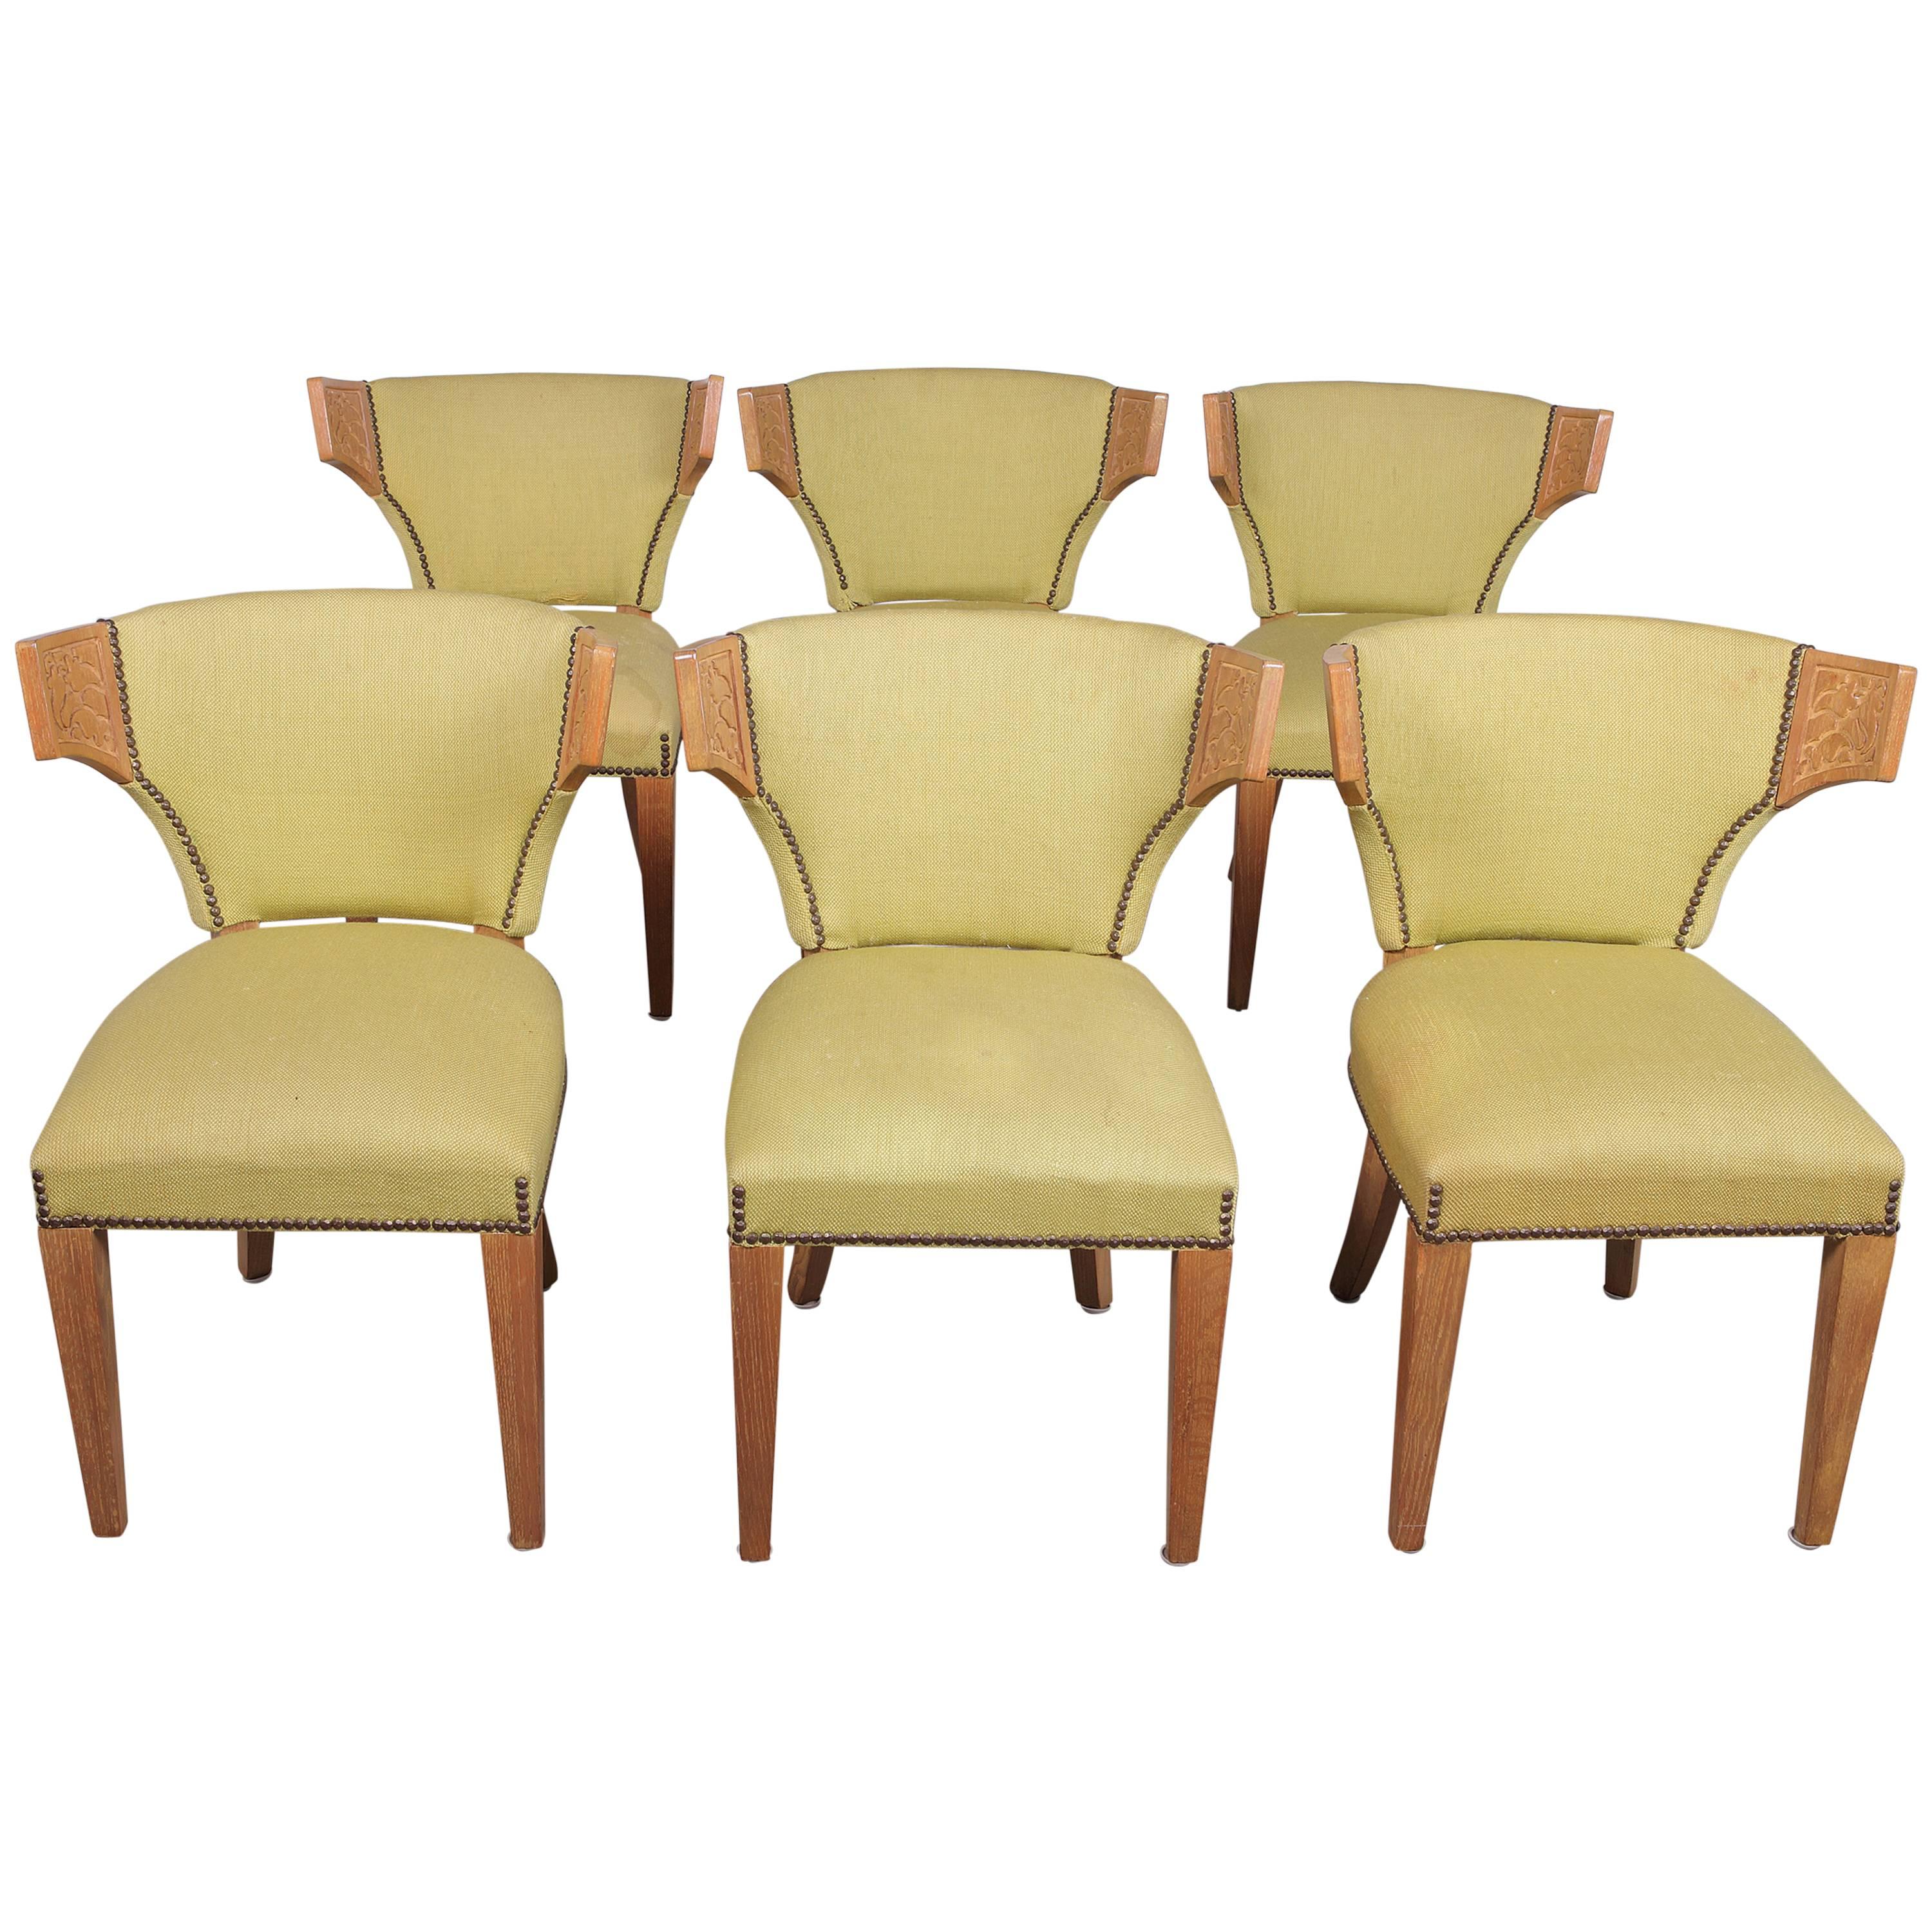 Set of Six Mid-Century Dining Chairs Designed by Harold Schwartz for Romweber